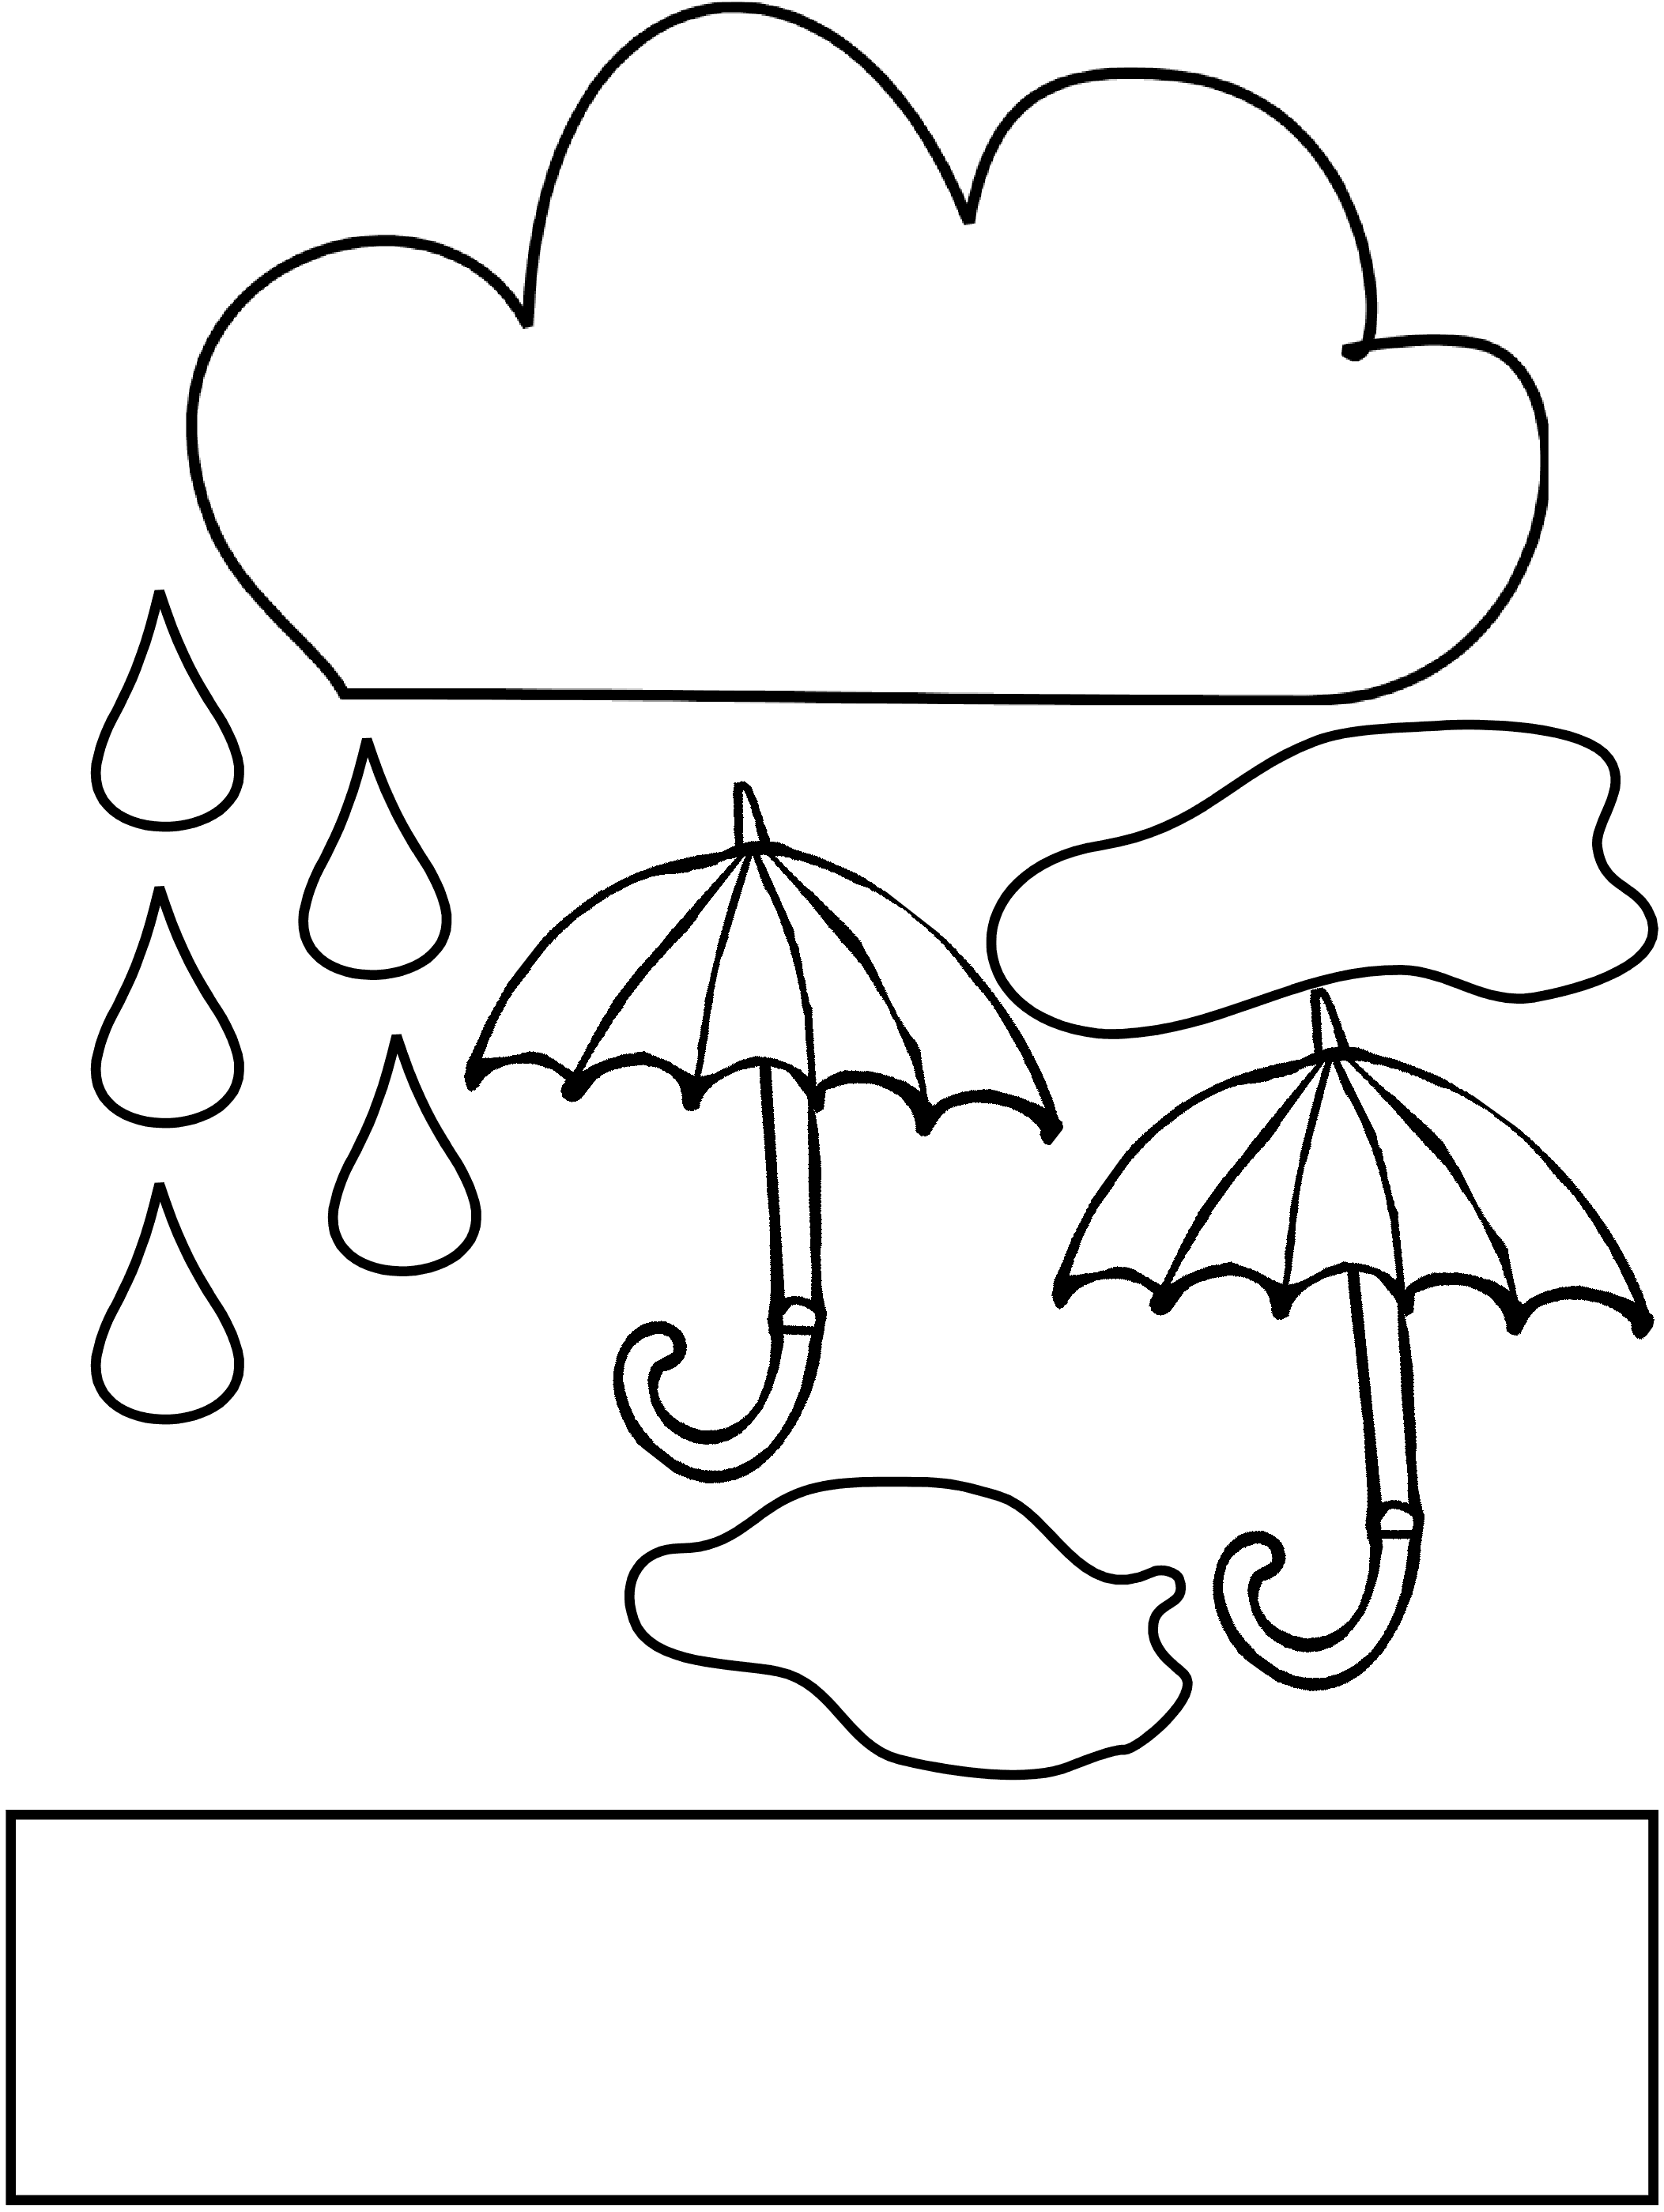 Rain Clouds And Umbrellas Coloring Page